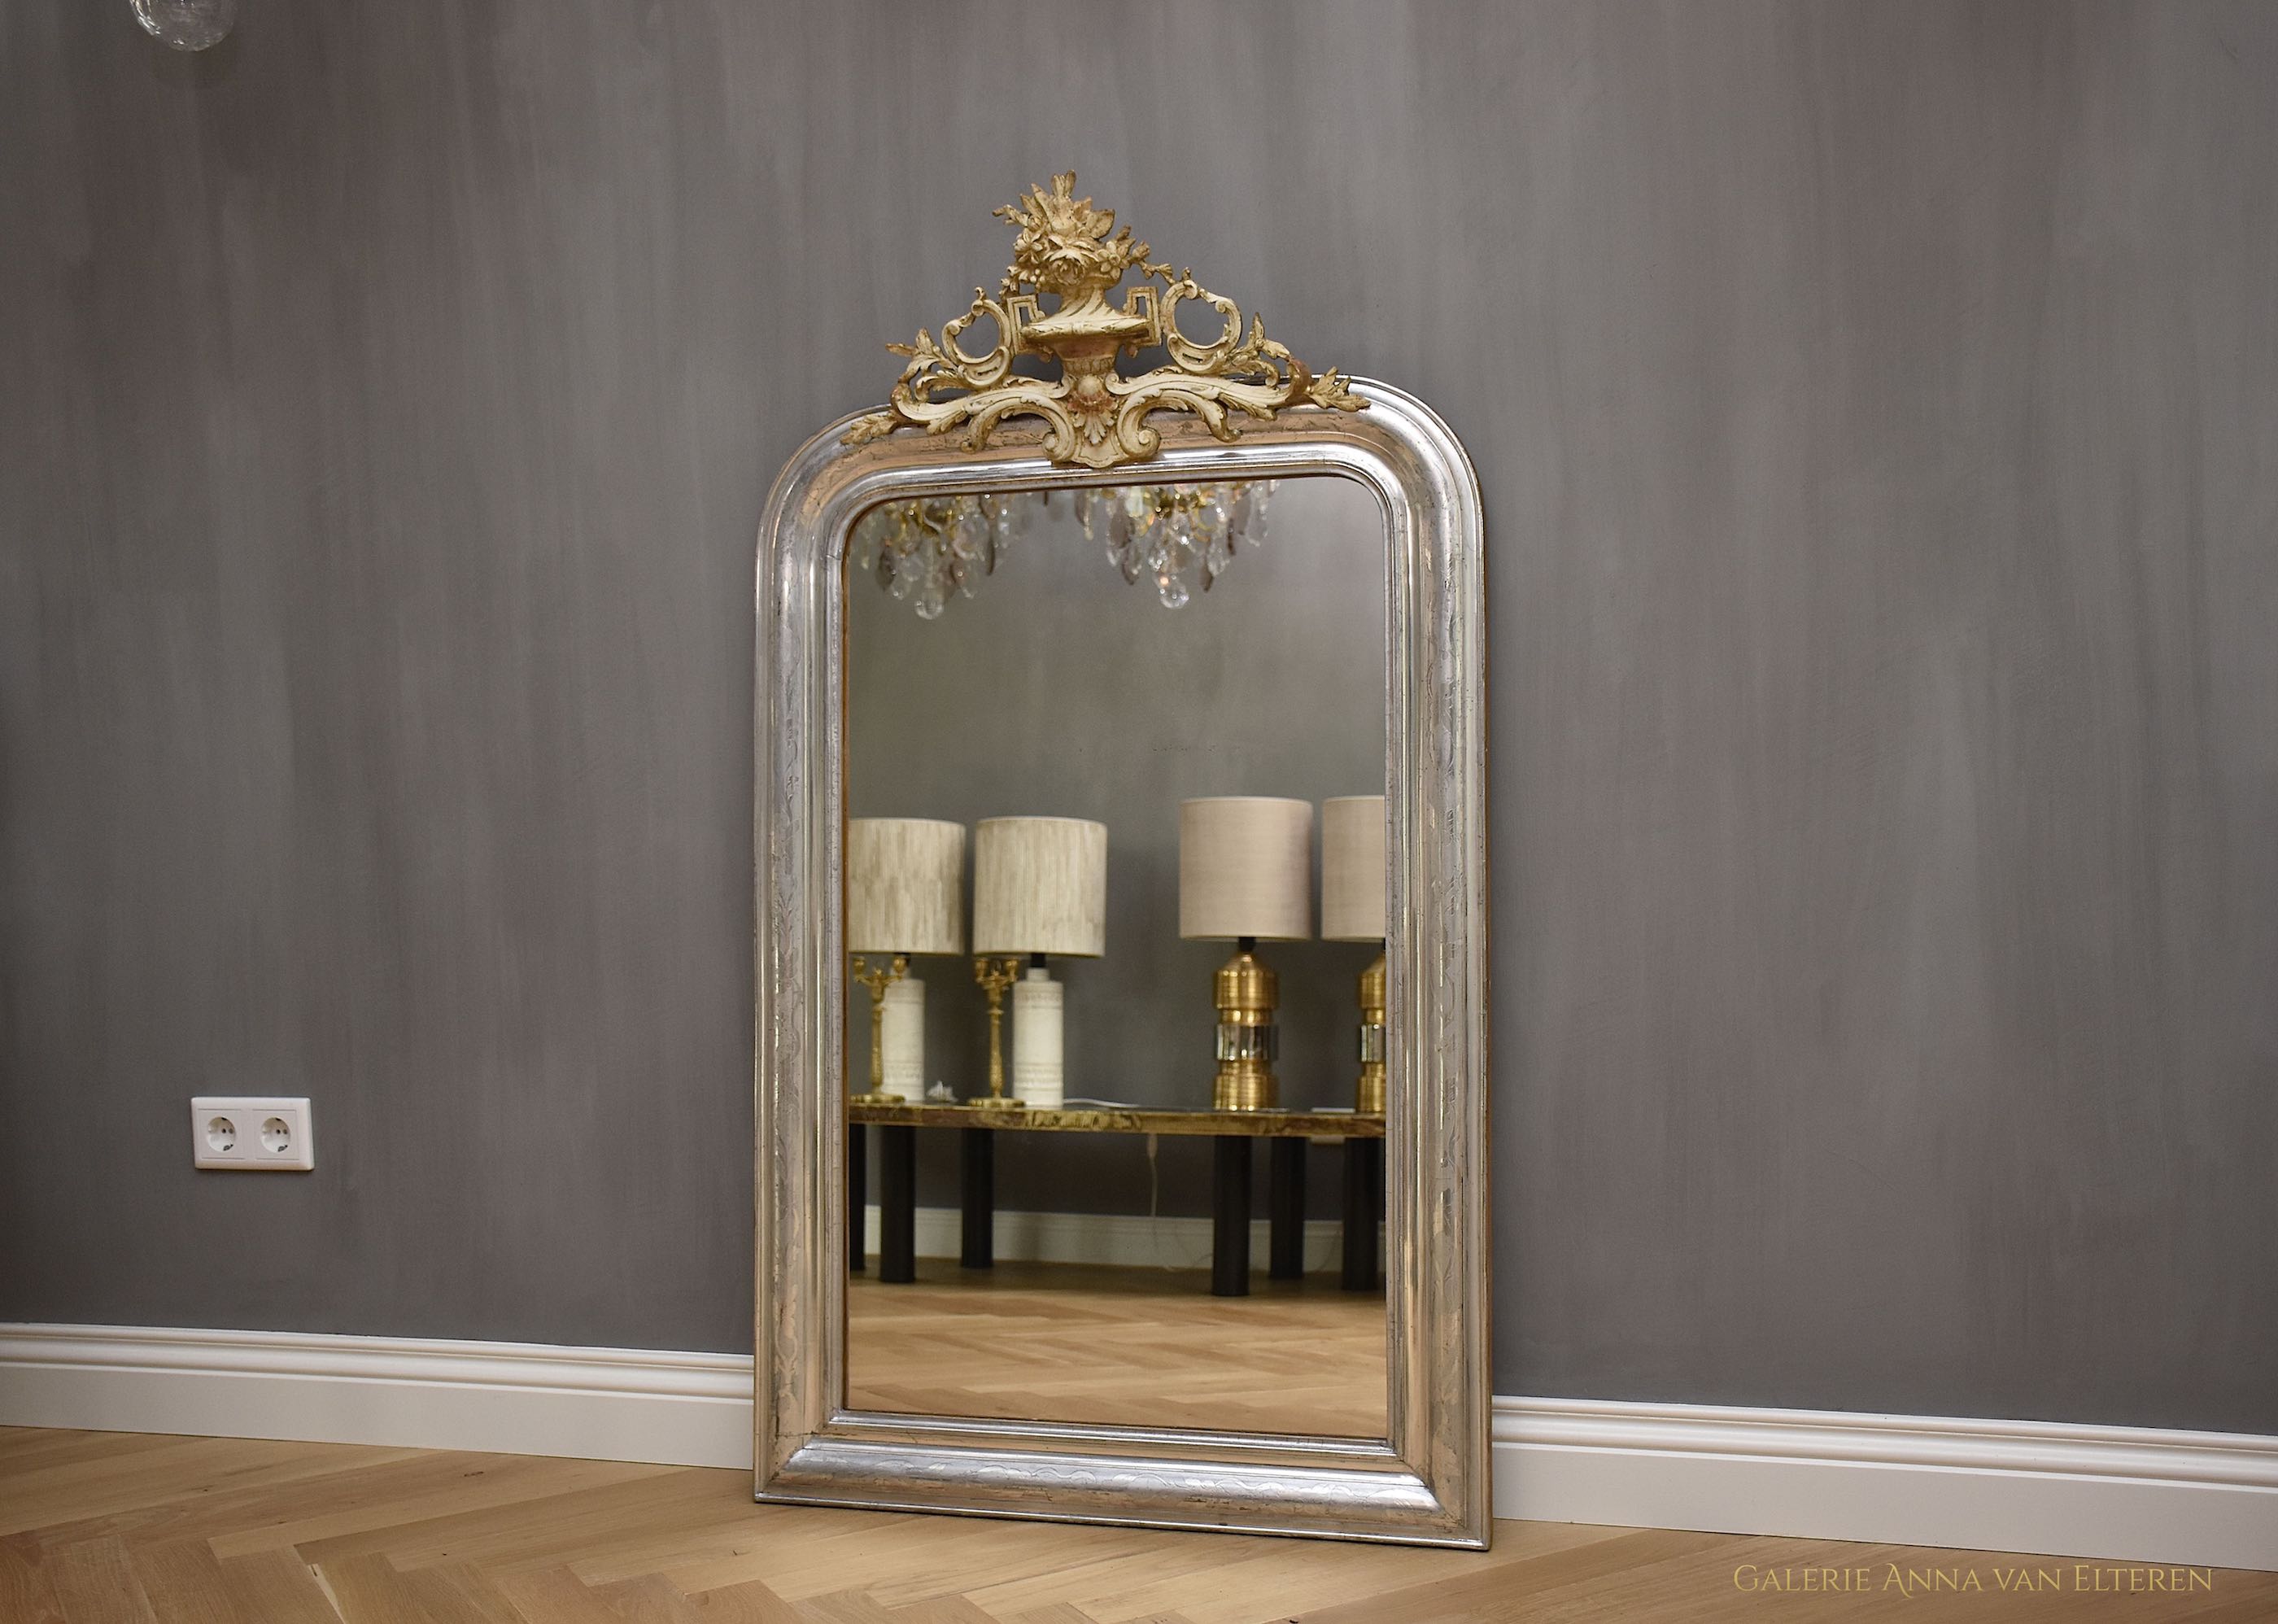 19th century silver leaf French mirror Louis Philippe with a crown